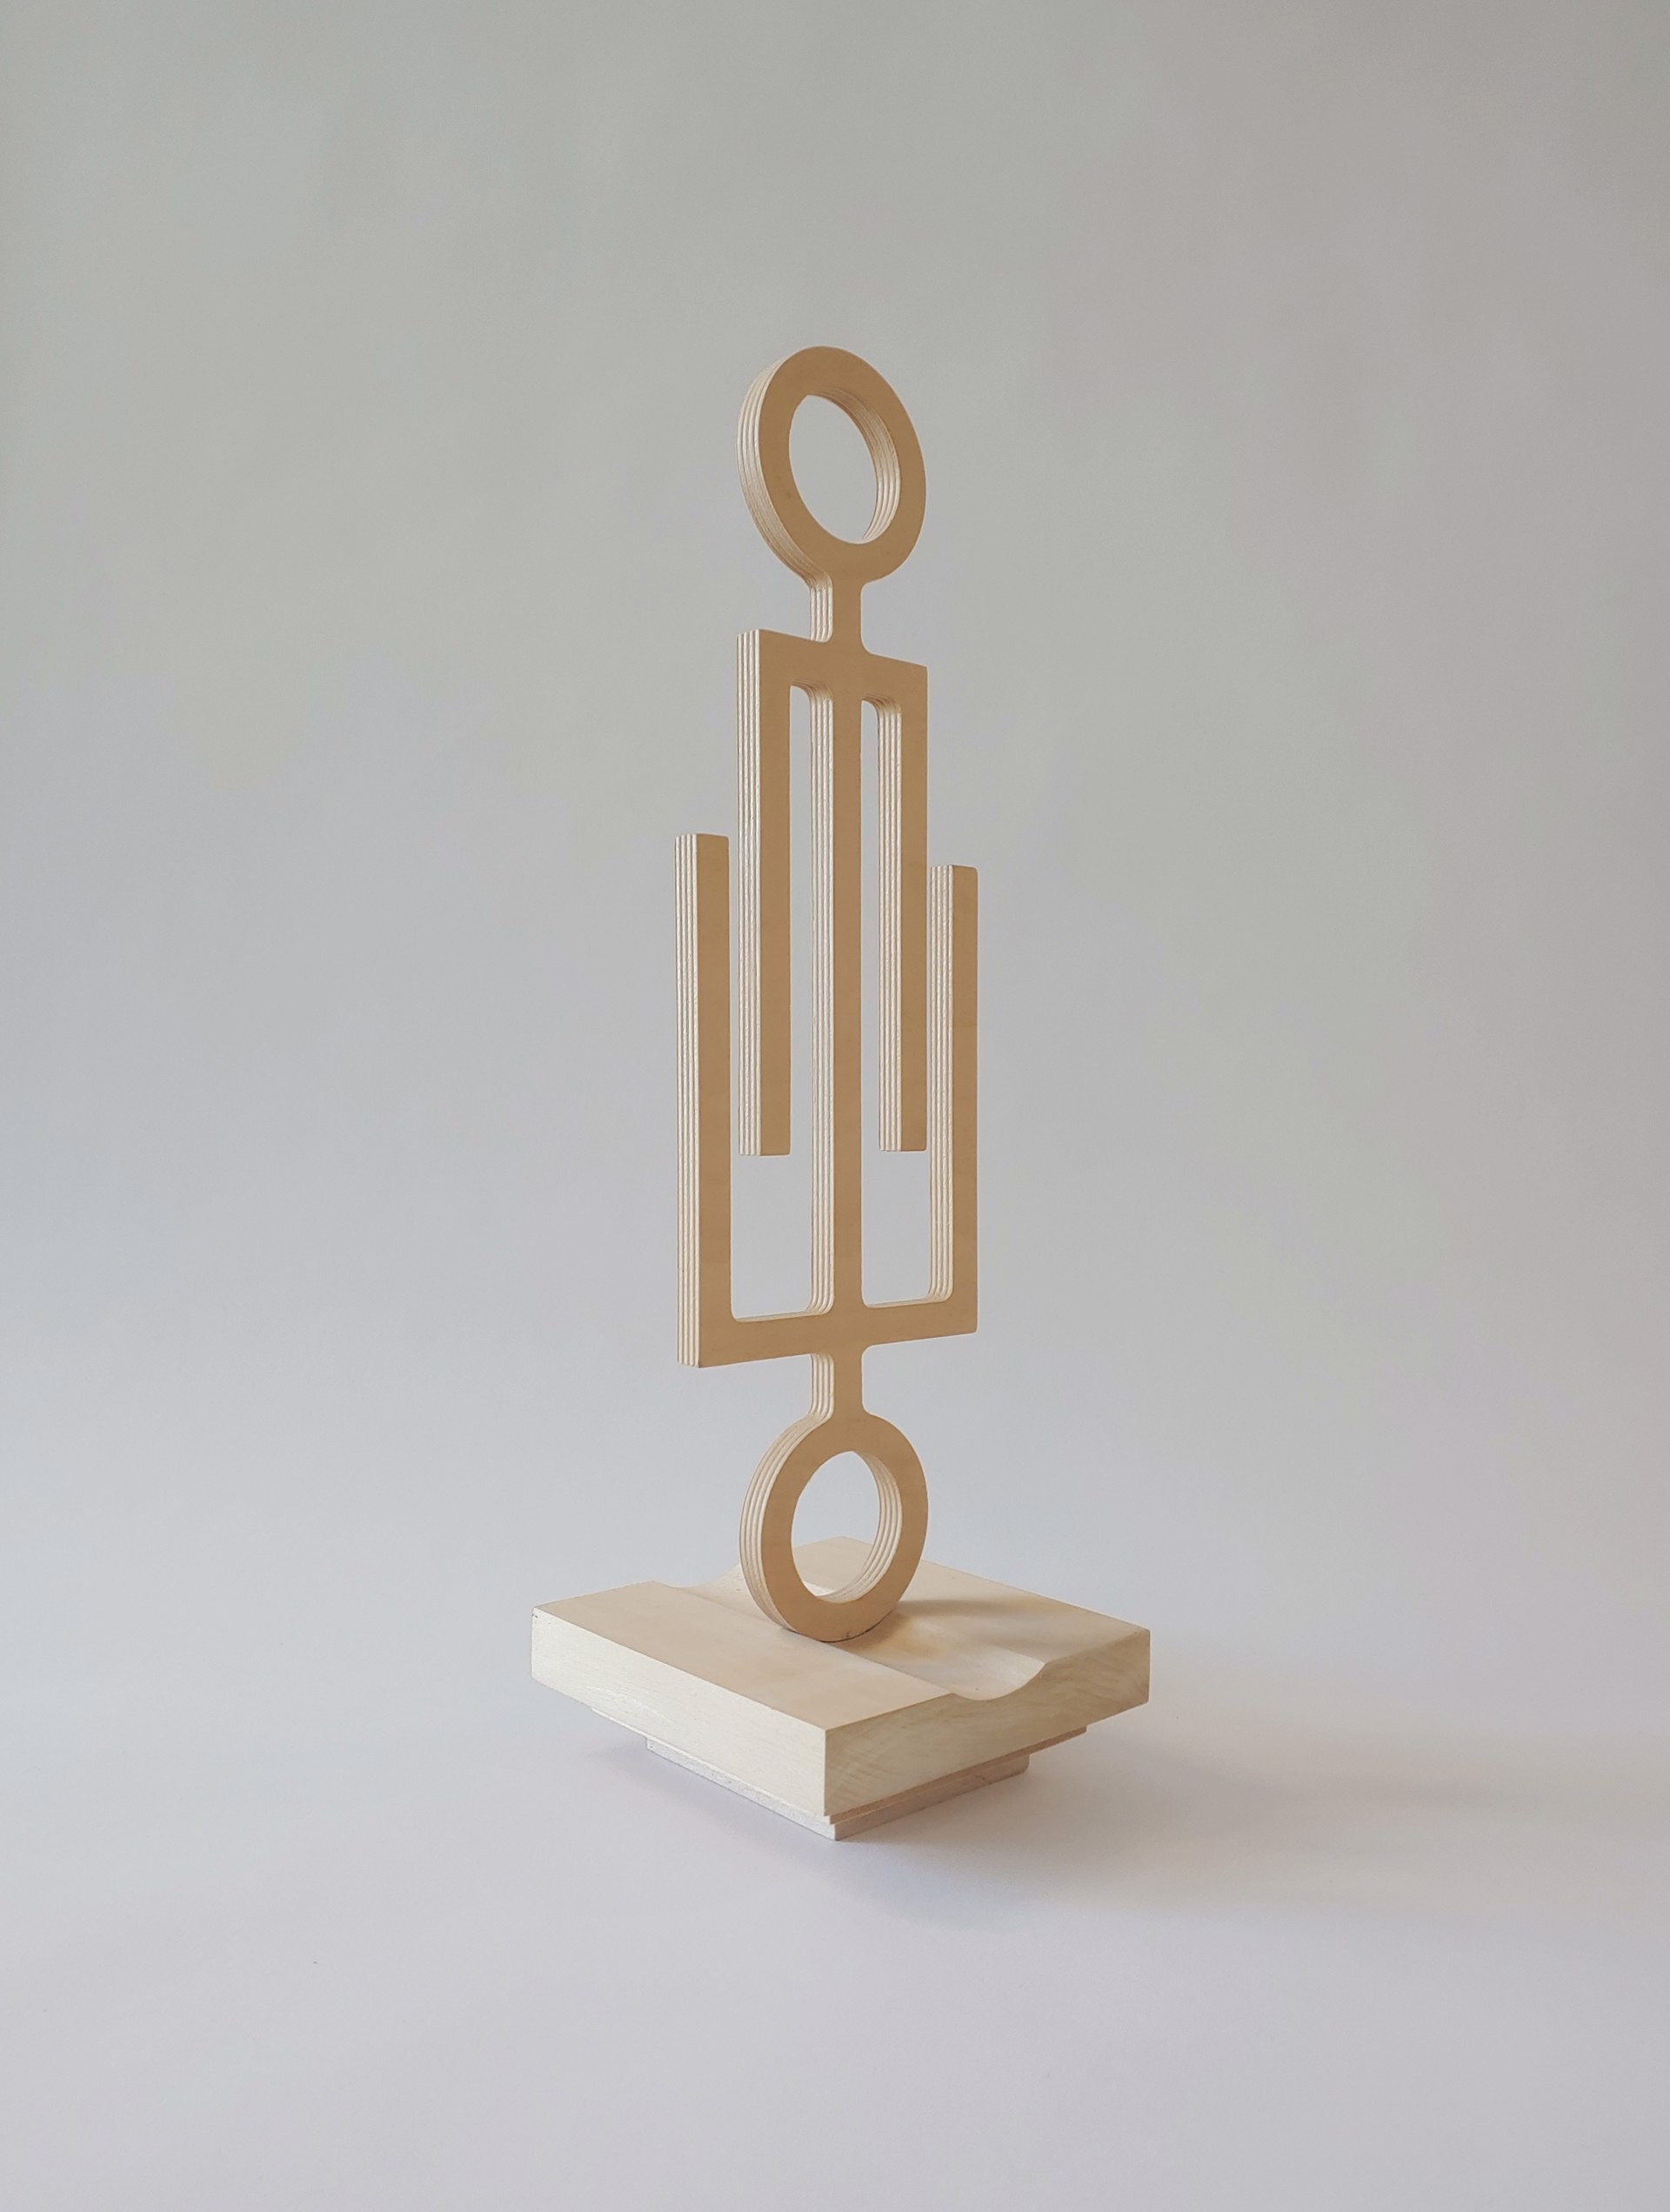 Abstract Cutout - Wood Sculpture, unfinished by David Amdur